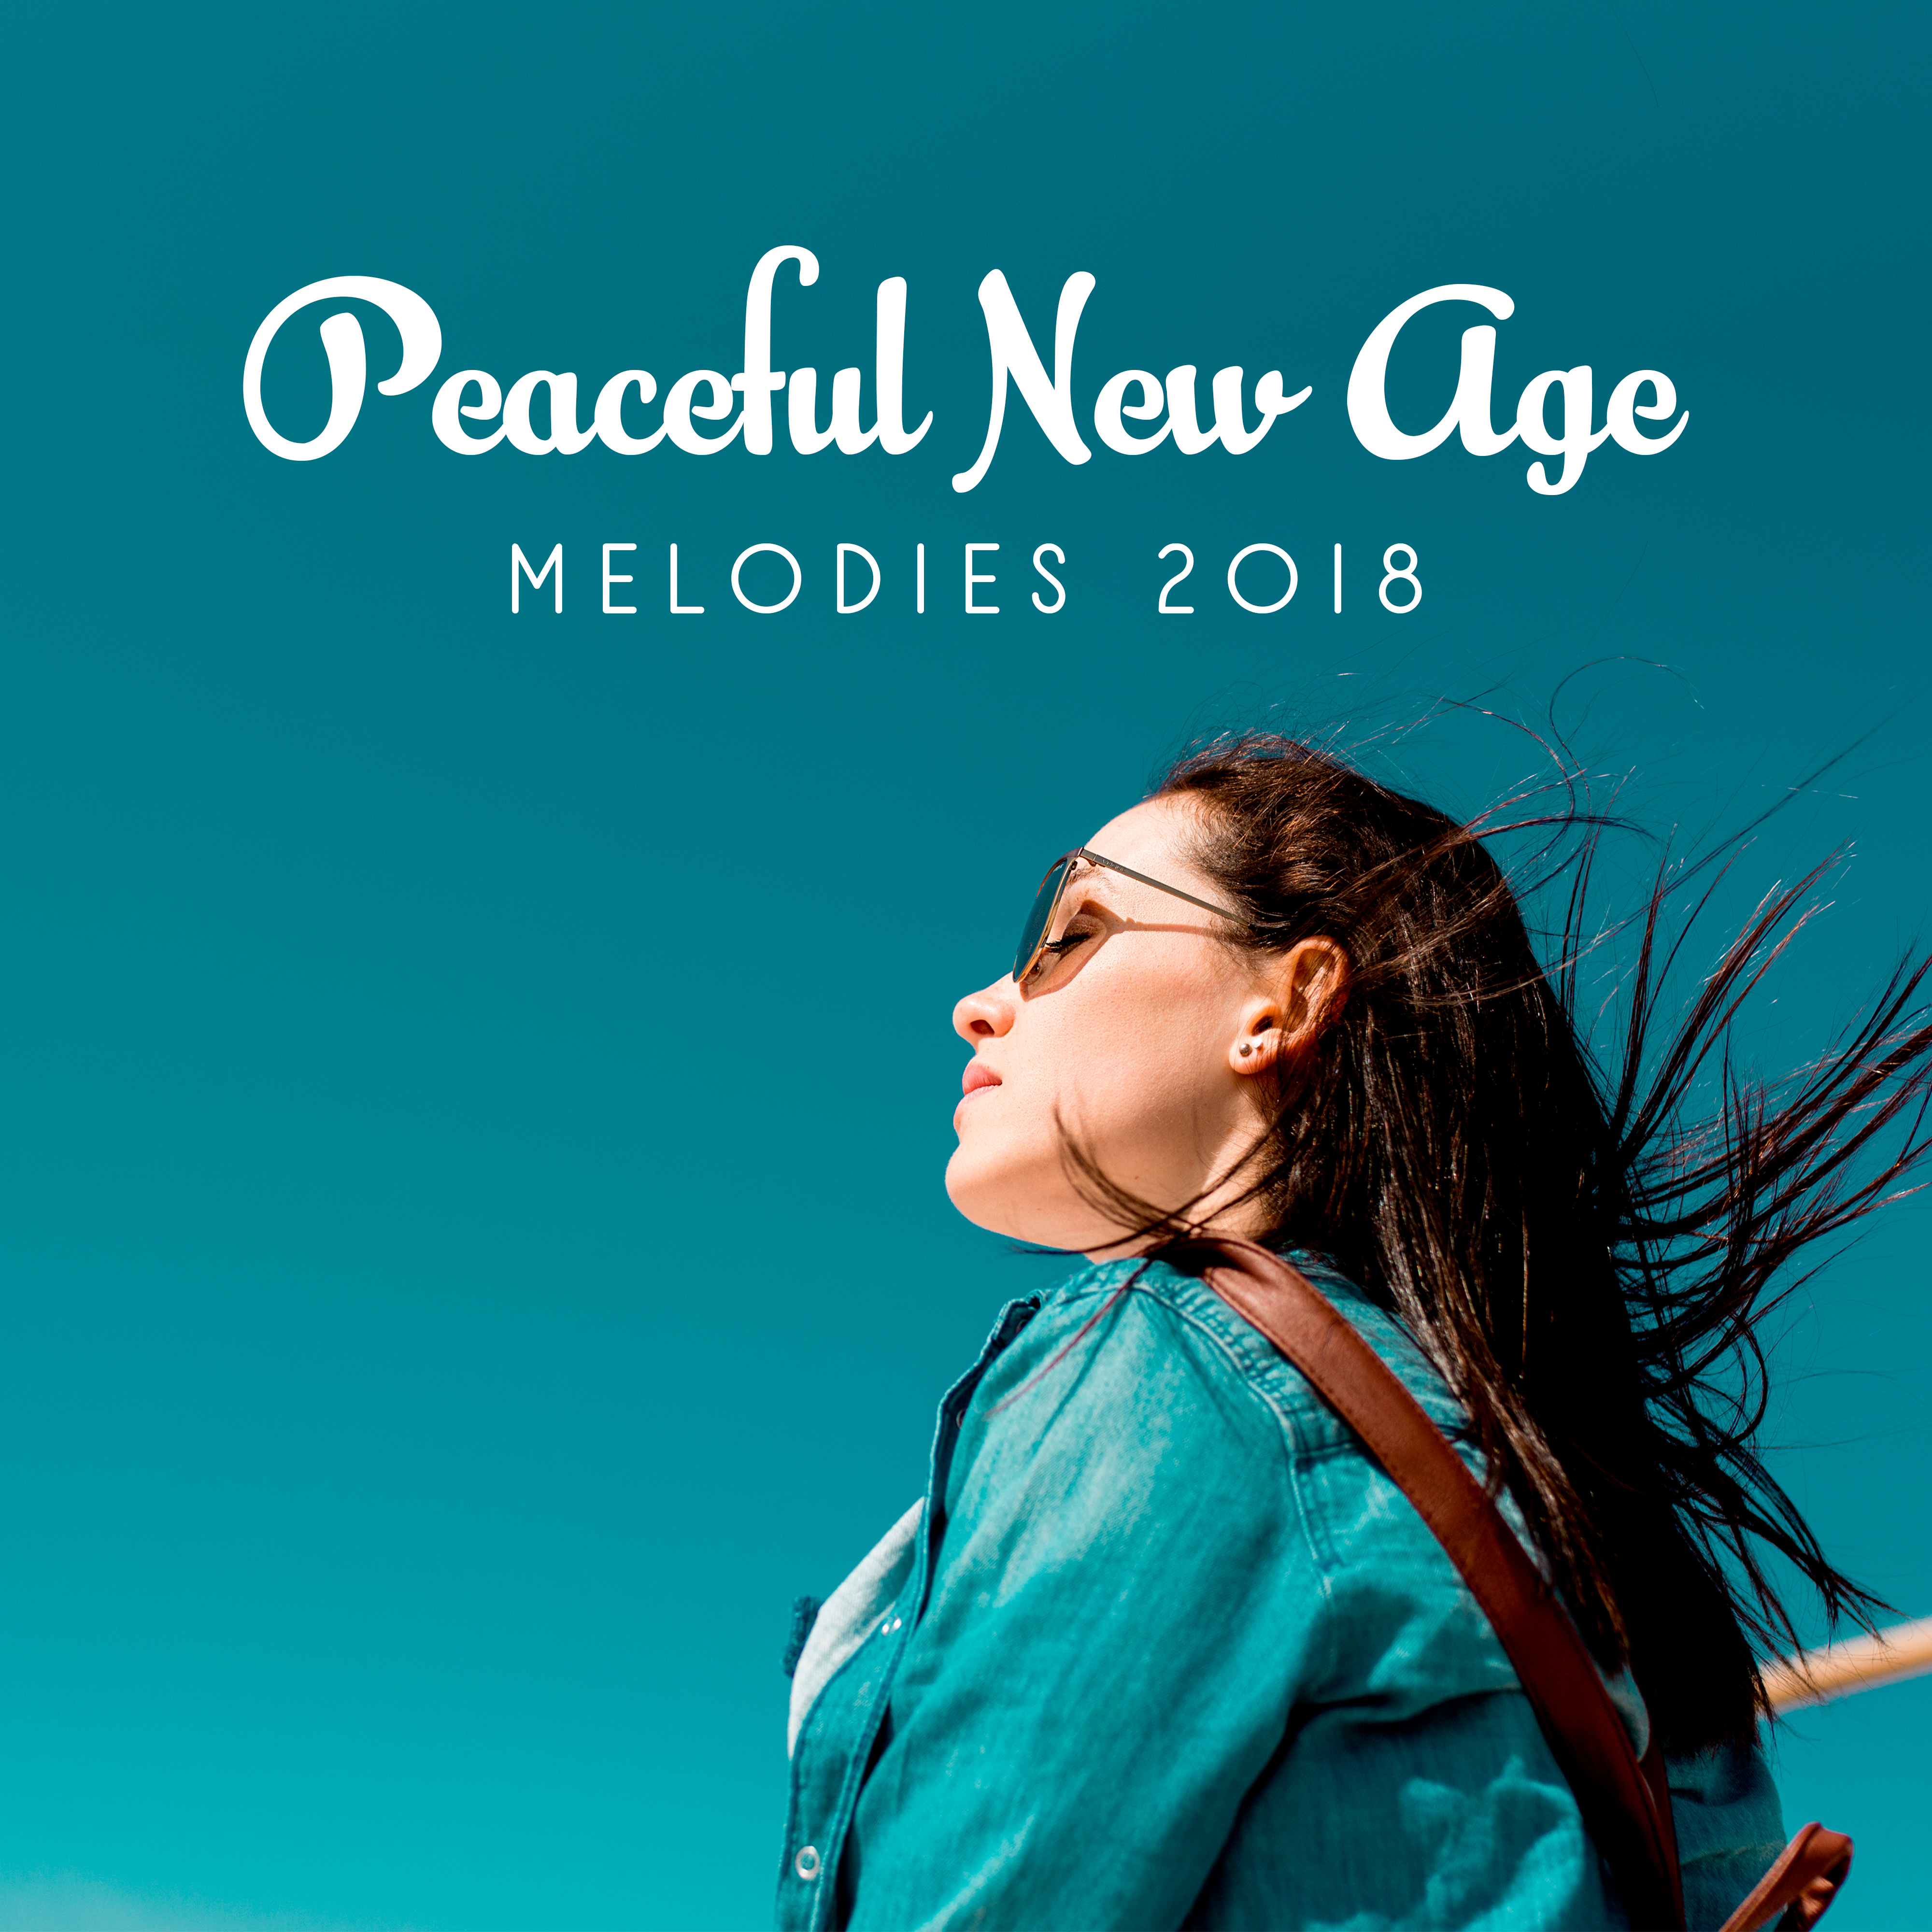 Peaceful New Age Melodies 2018